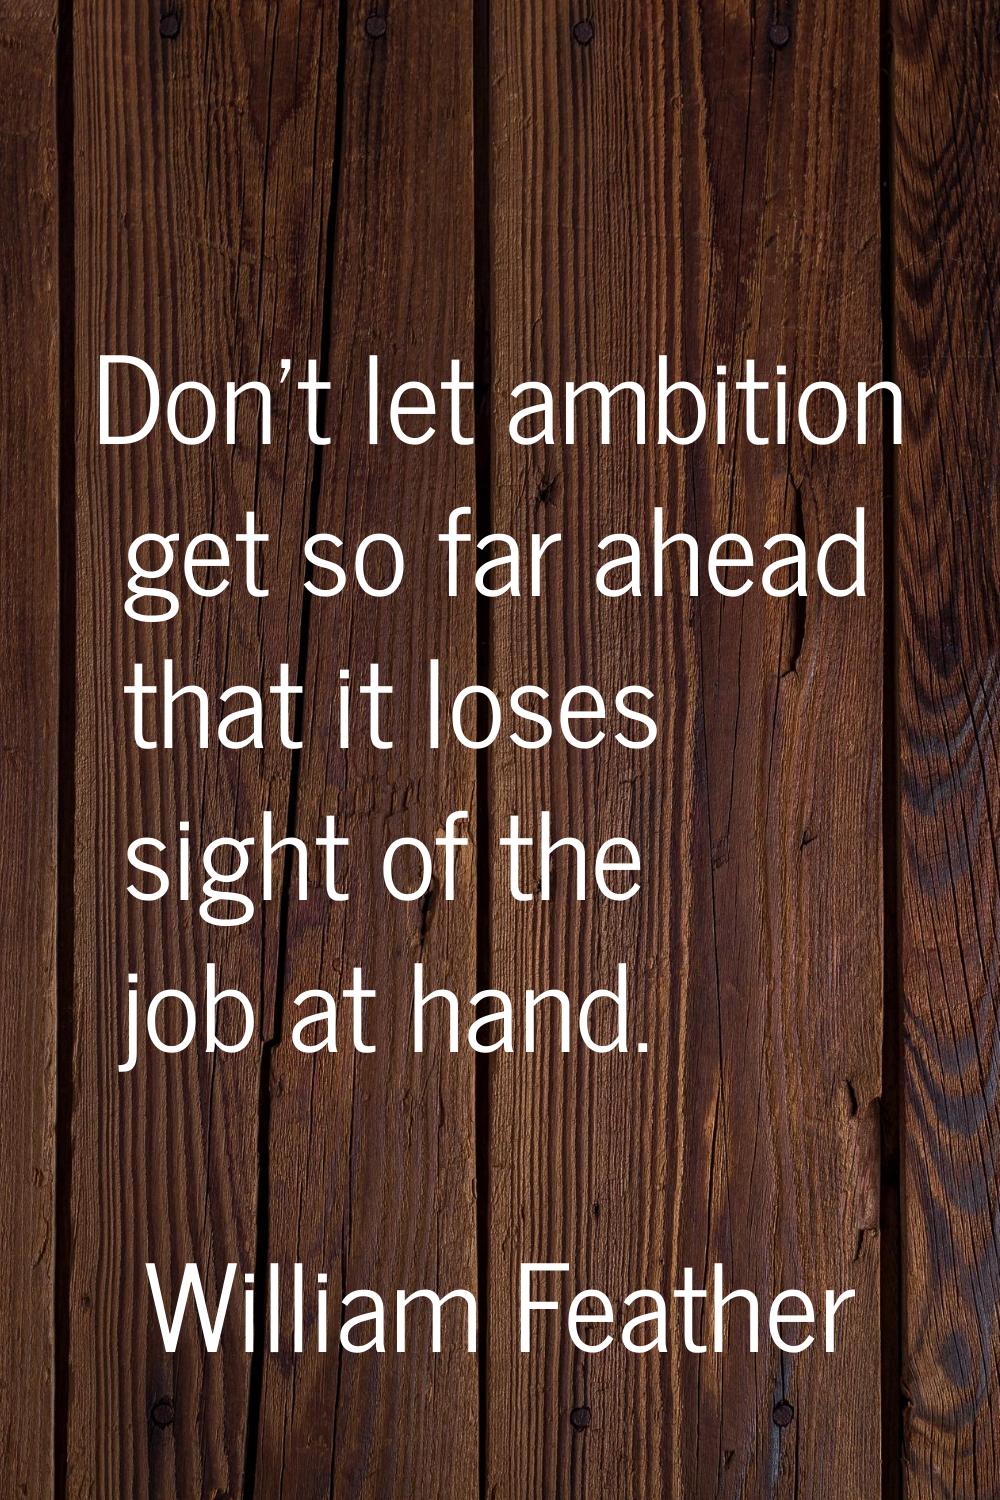 Don't let ambition get so far ahead that it loses sight of the job at hand.